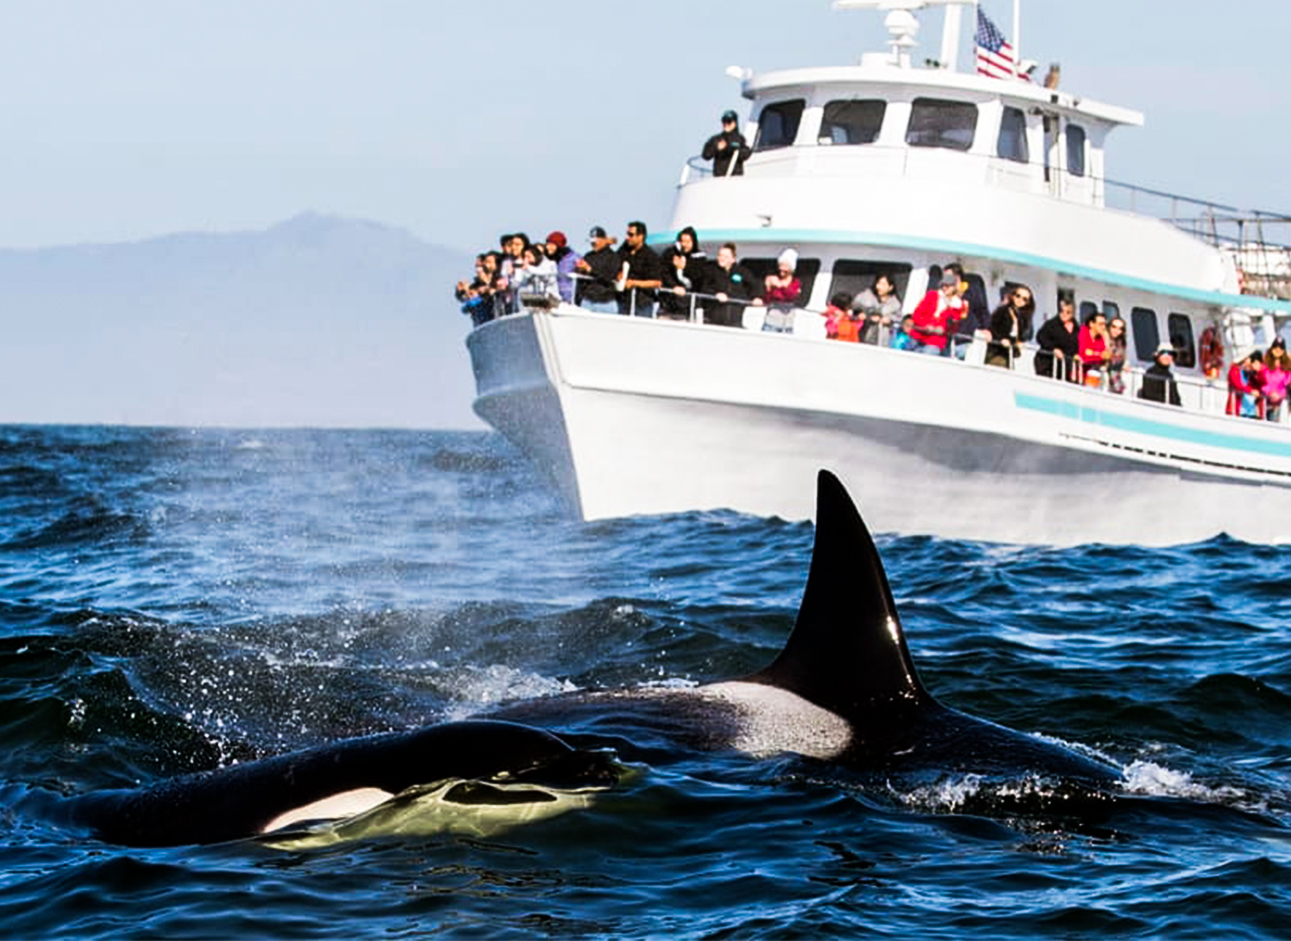 Whale Watching - Witness majestic marine creatures on exciting whale watching tours